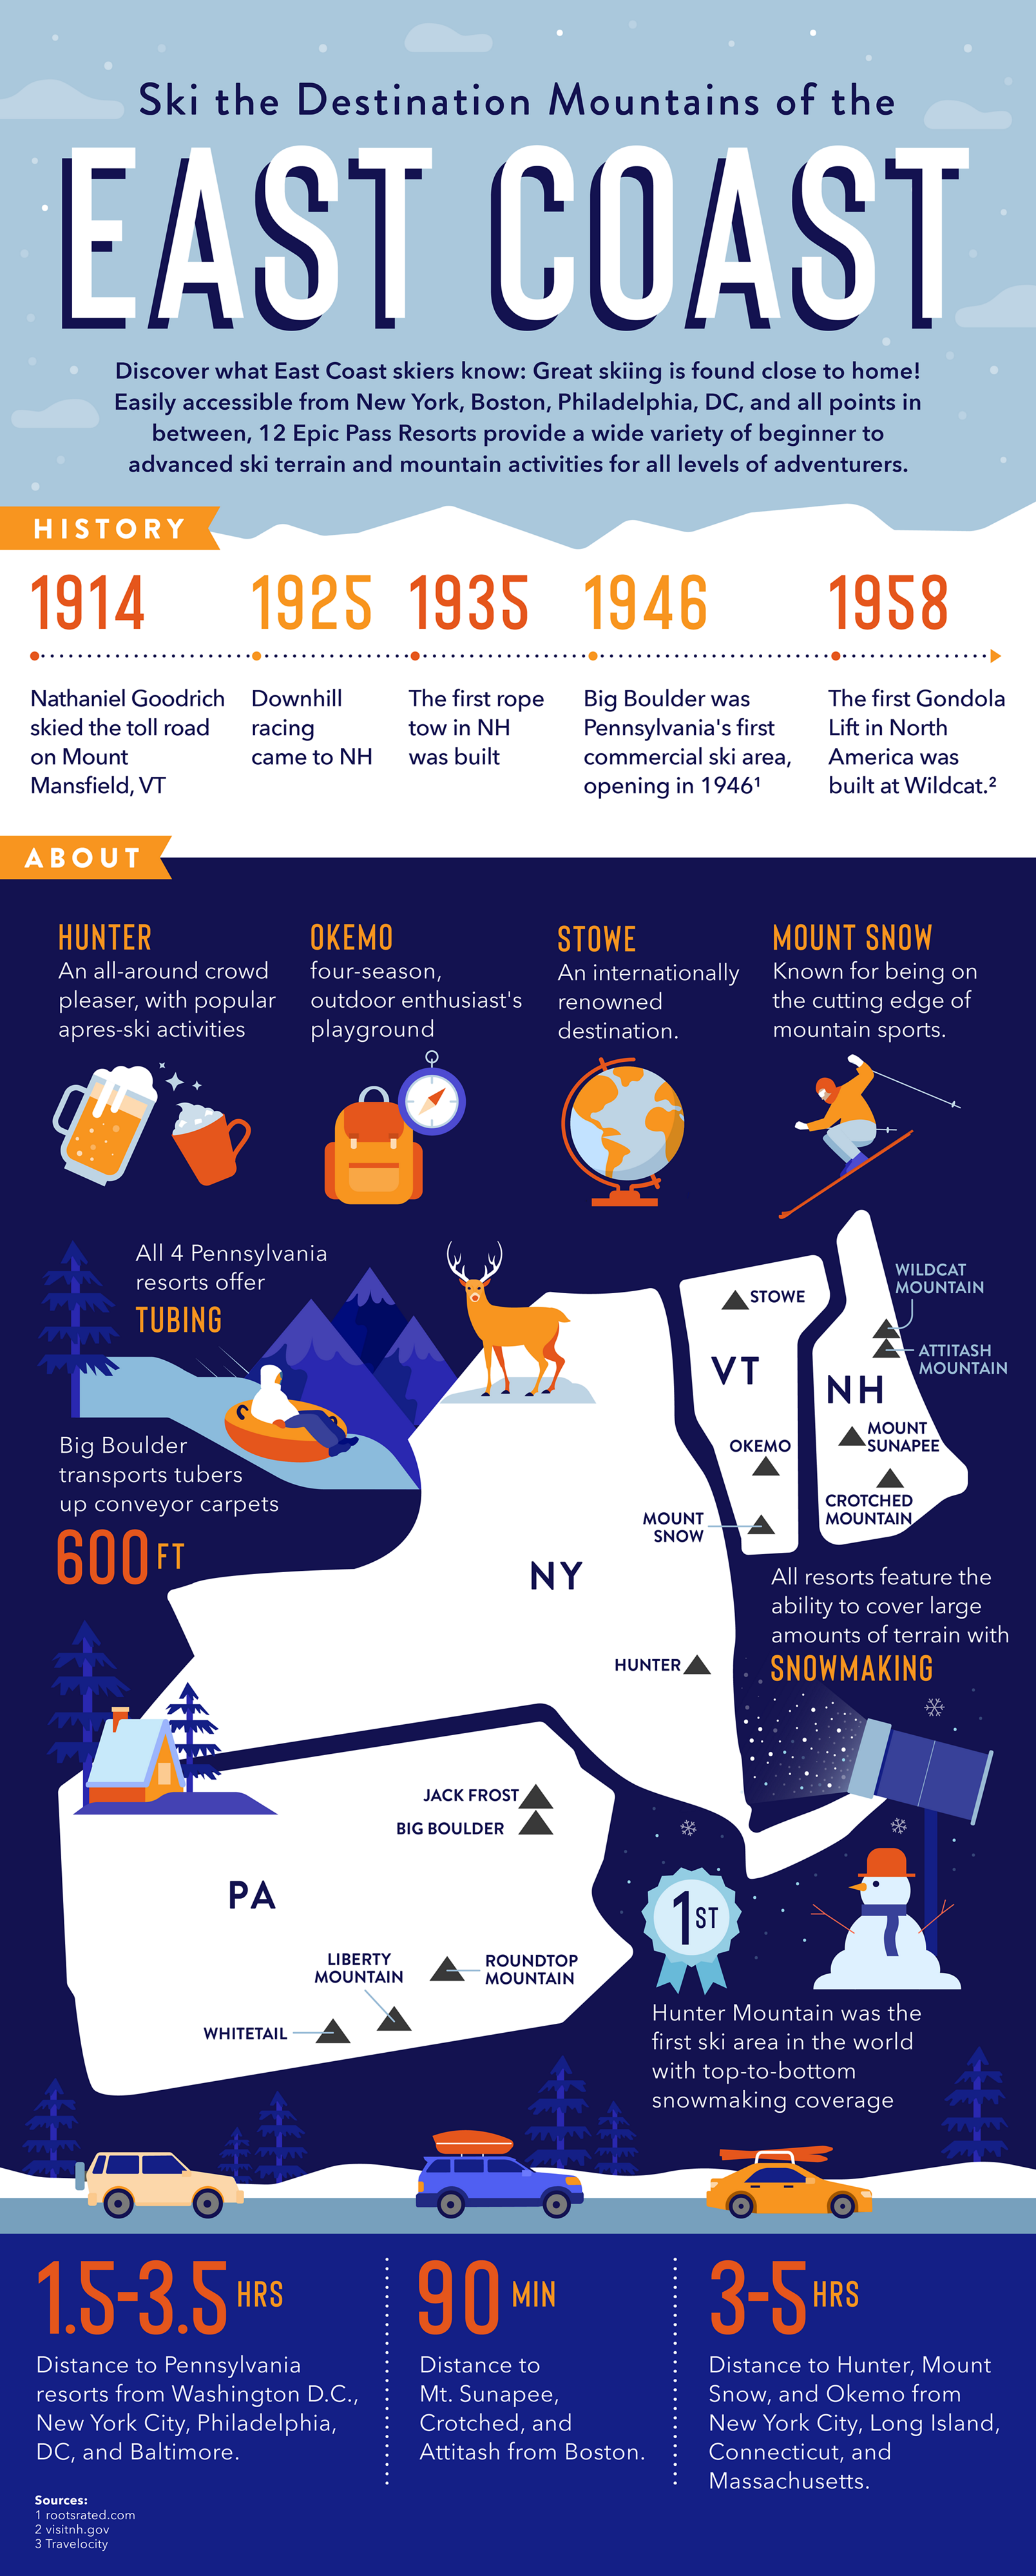 An infographic about the east coast including history and fun facts about the region. Fun facts include that all 4 PA resorts offer tubing, and Hunter mountain is the snowmaking capital of the world.